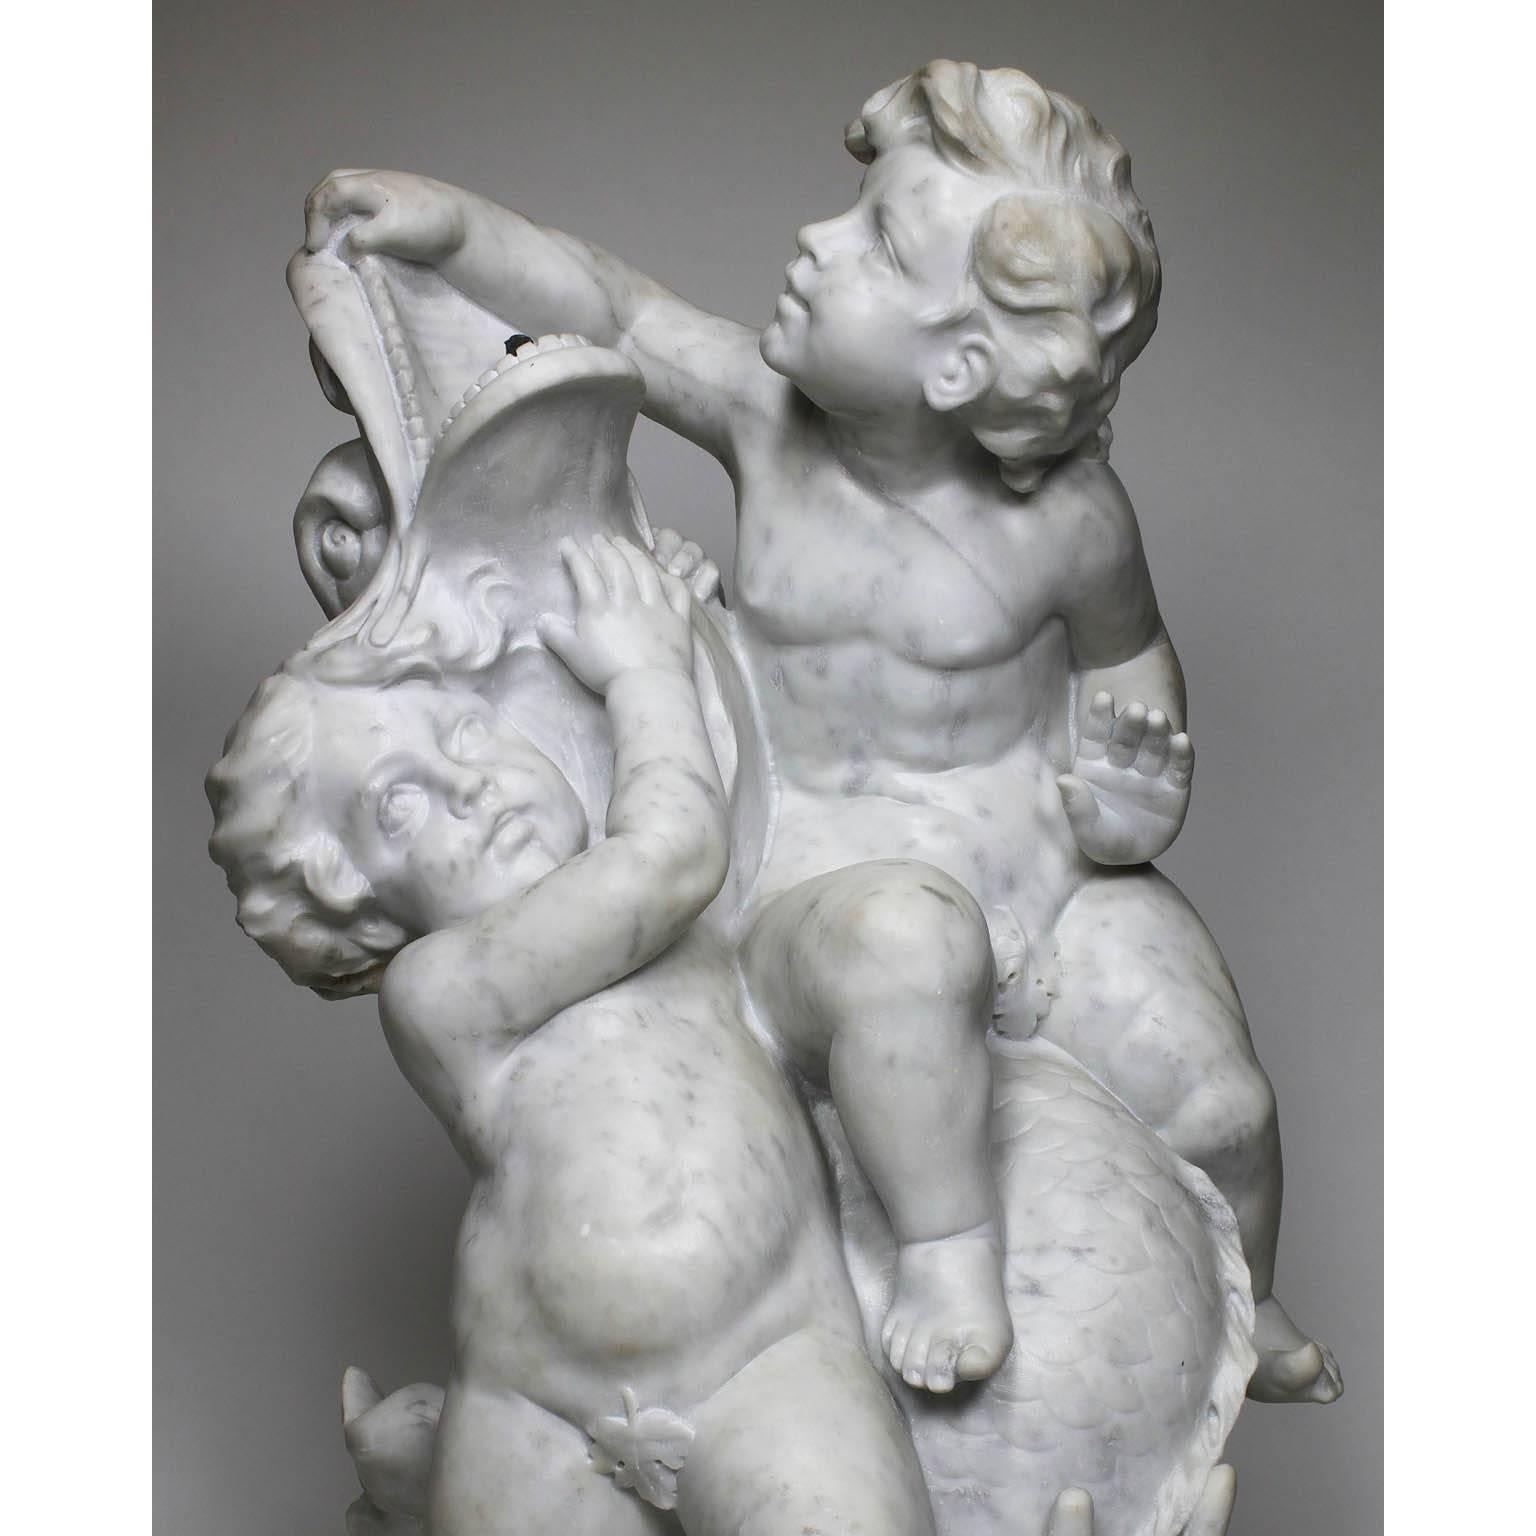 A fine and charming French 19th-20th century carved white marble whimsical group sculpture depicting two putti (Children) playing with a dolphin, fitted for use as a fountain, Paris, circa 1900.

Measures: Height 36 1/4 inches (92.1 cm)
width 21 1/4